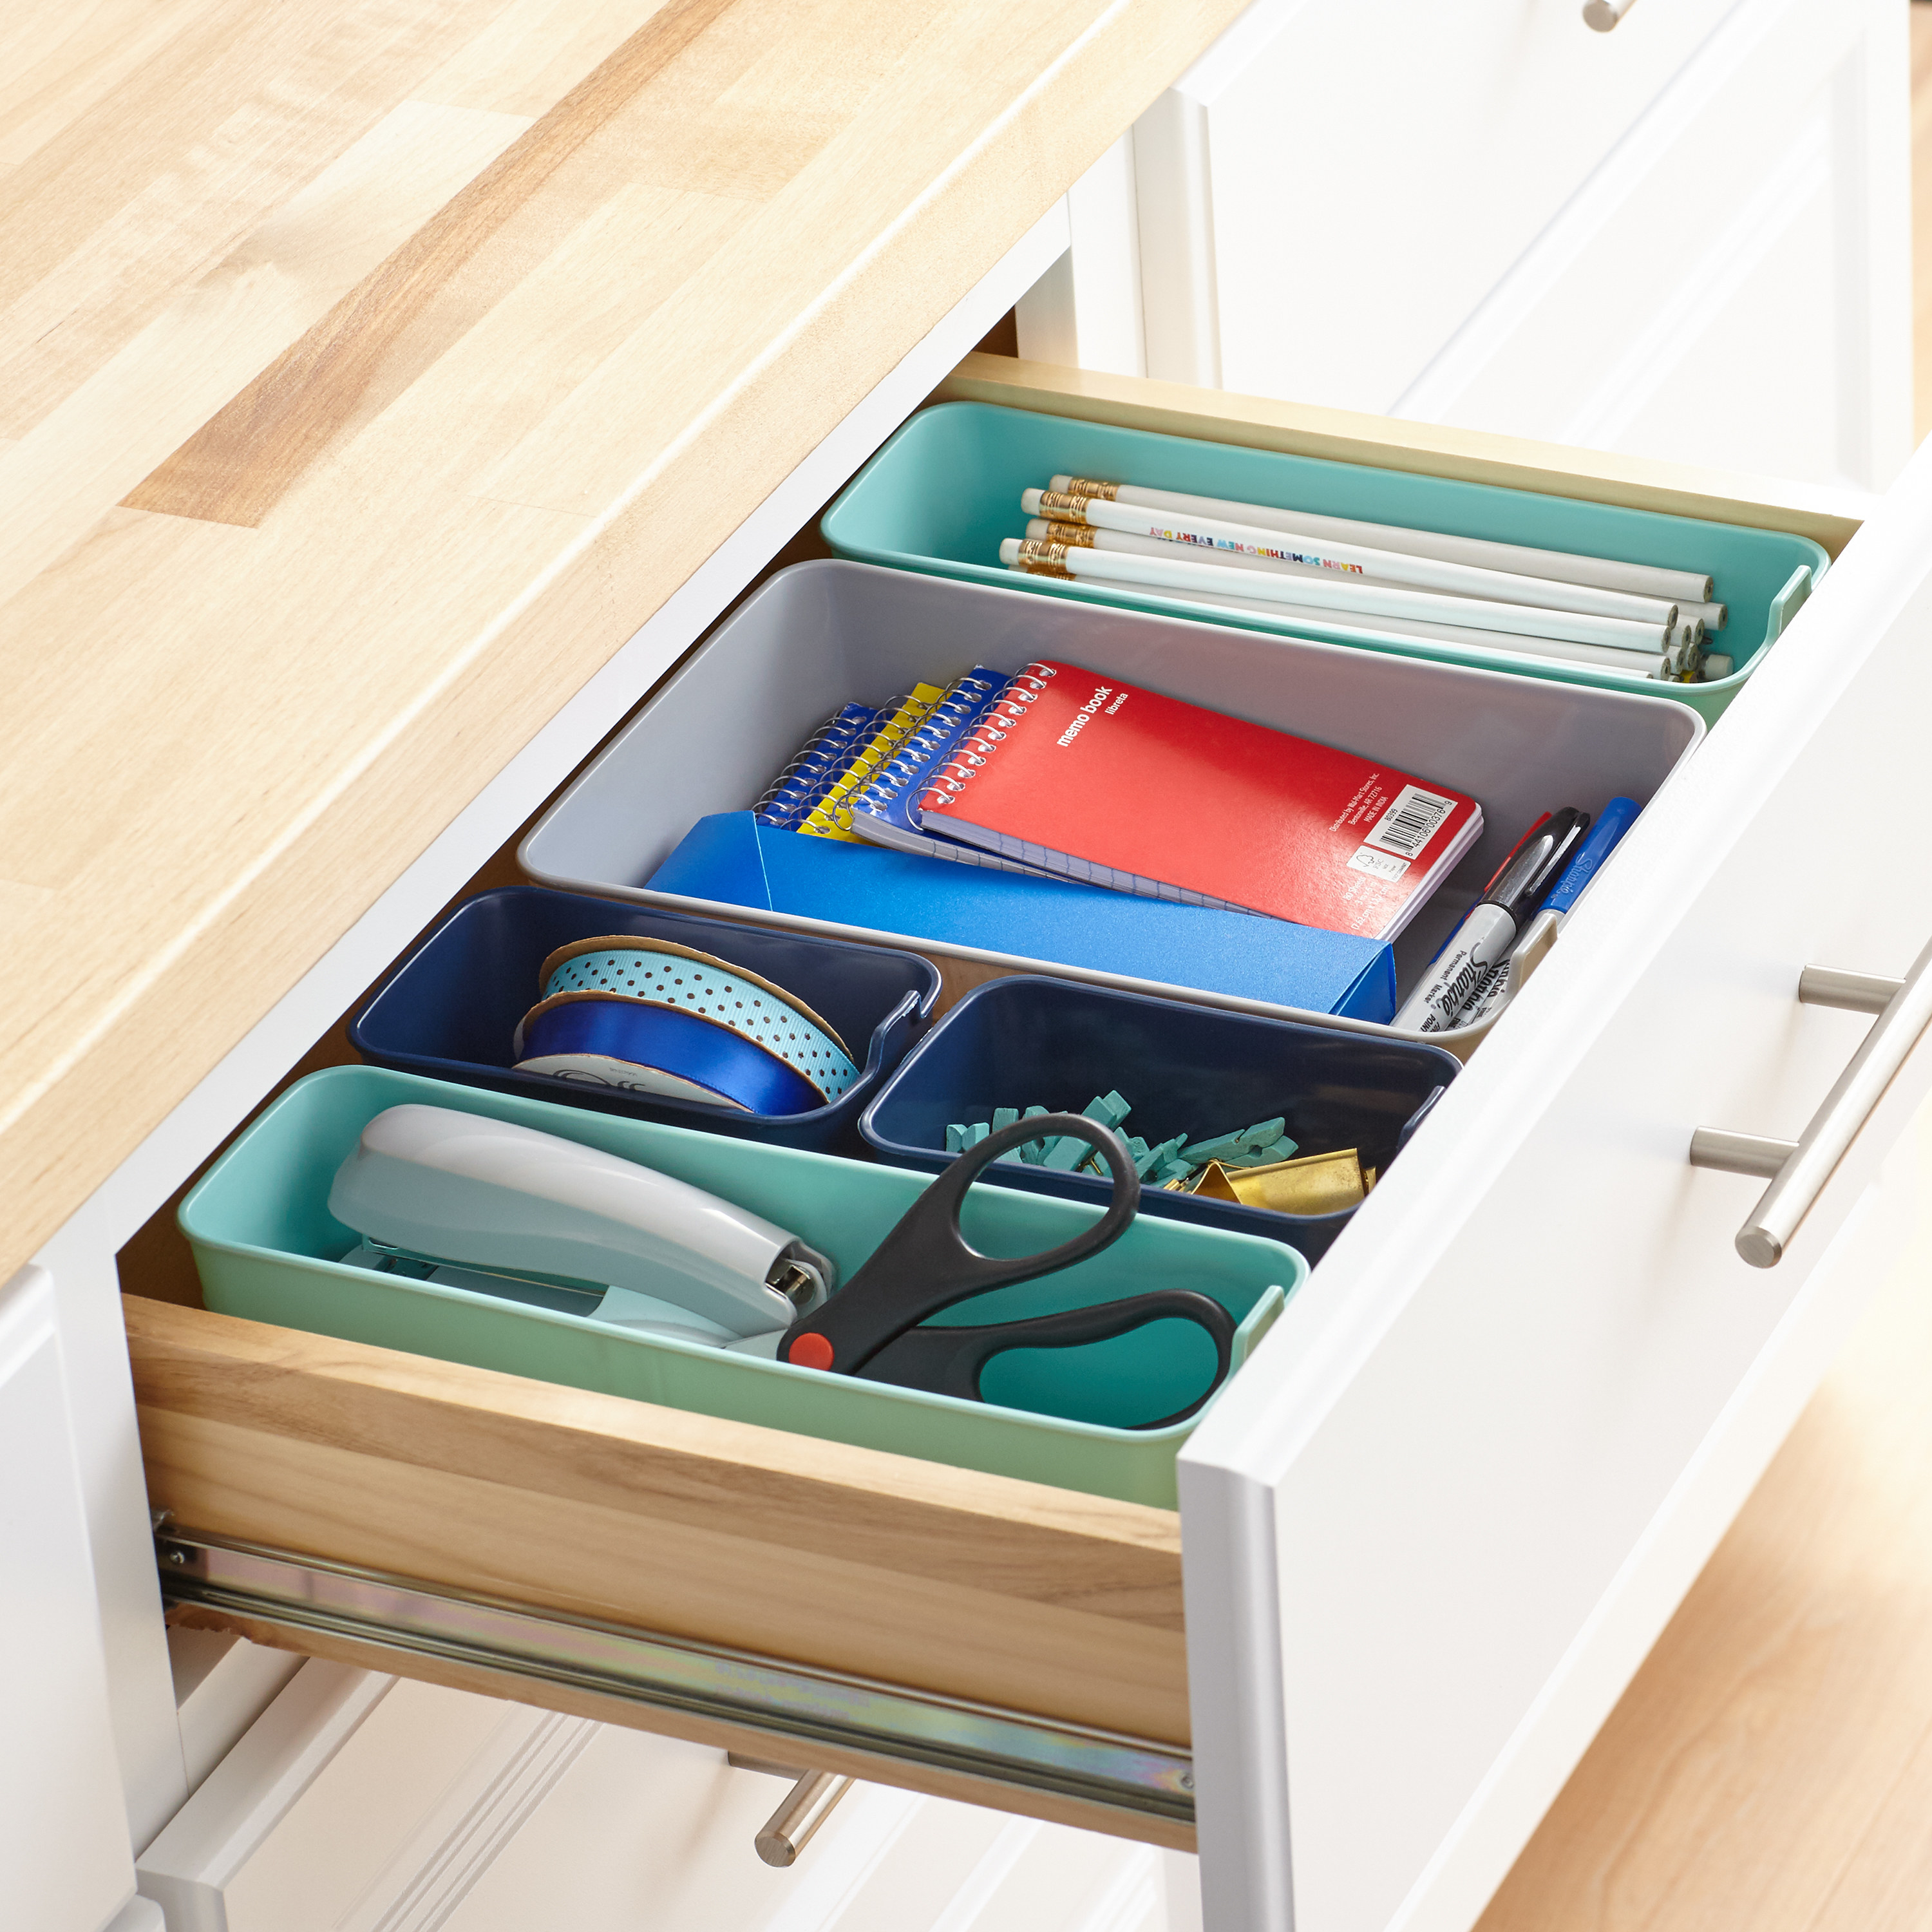 Multi-colored drawer organizers holding various office supplies inside a drawer